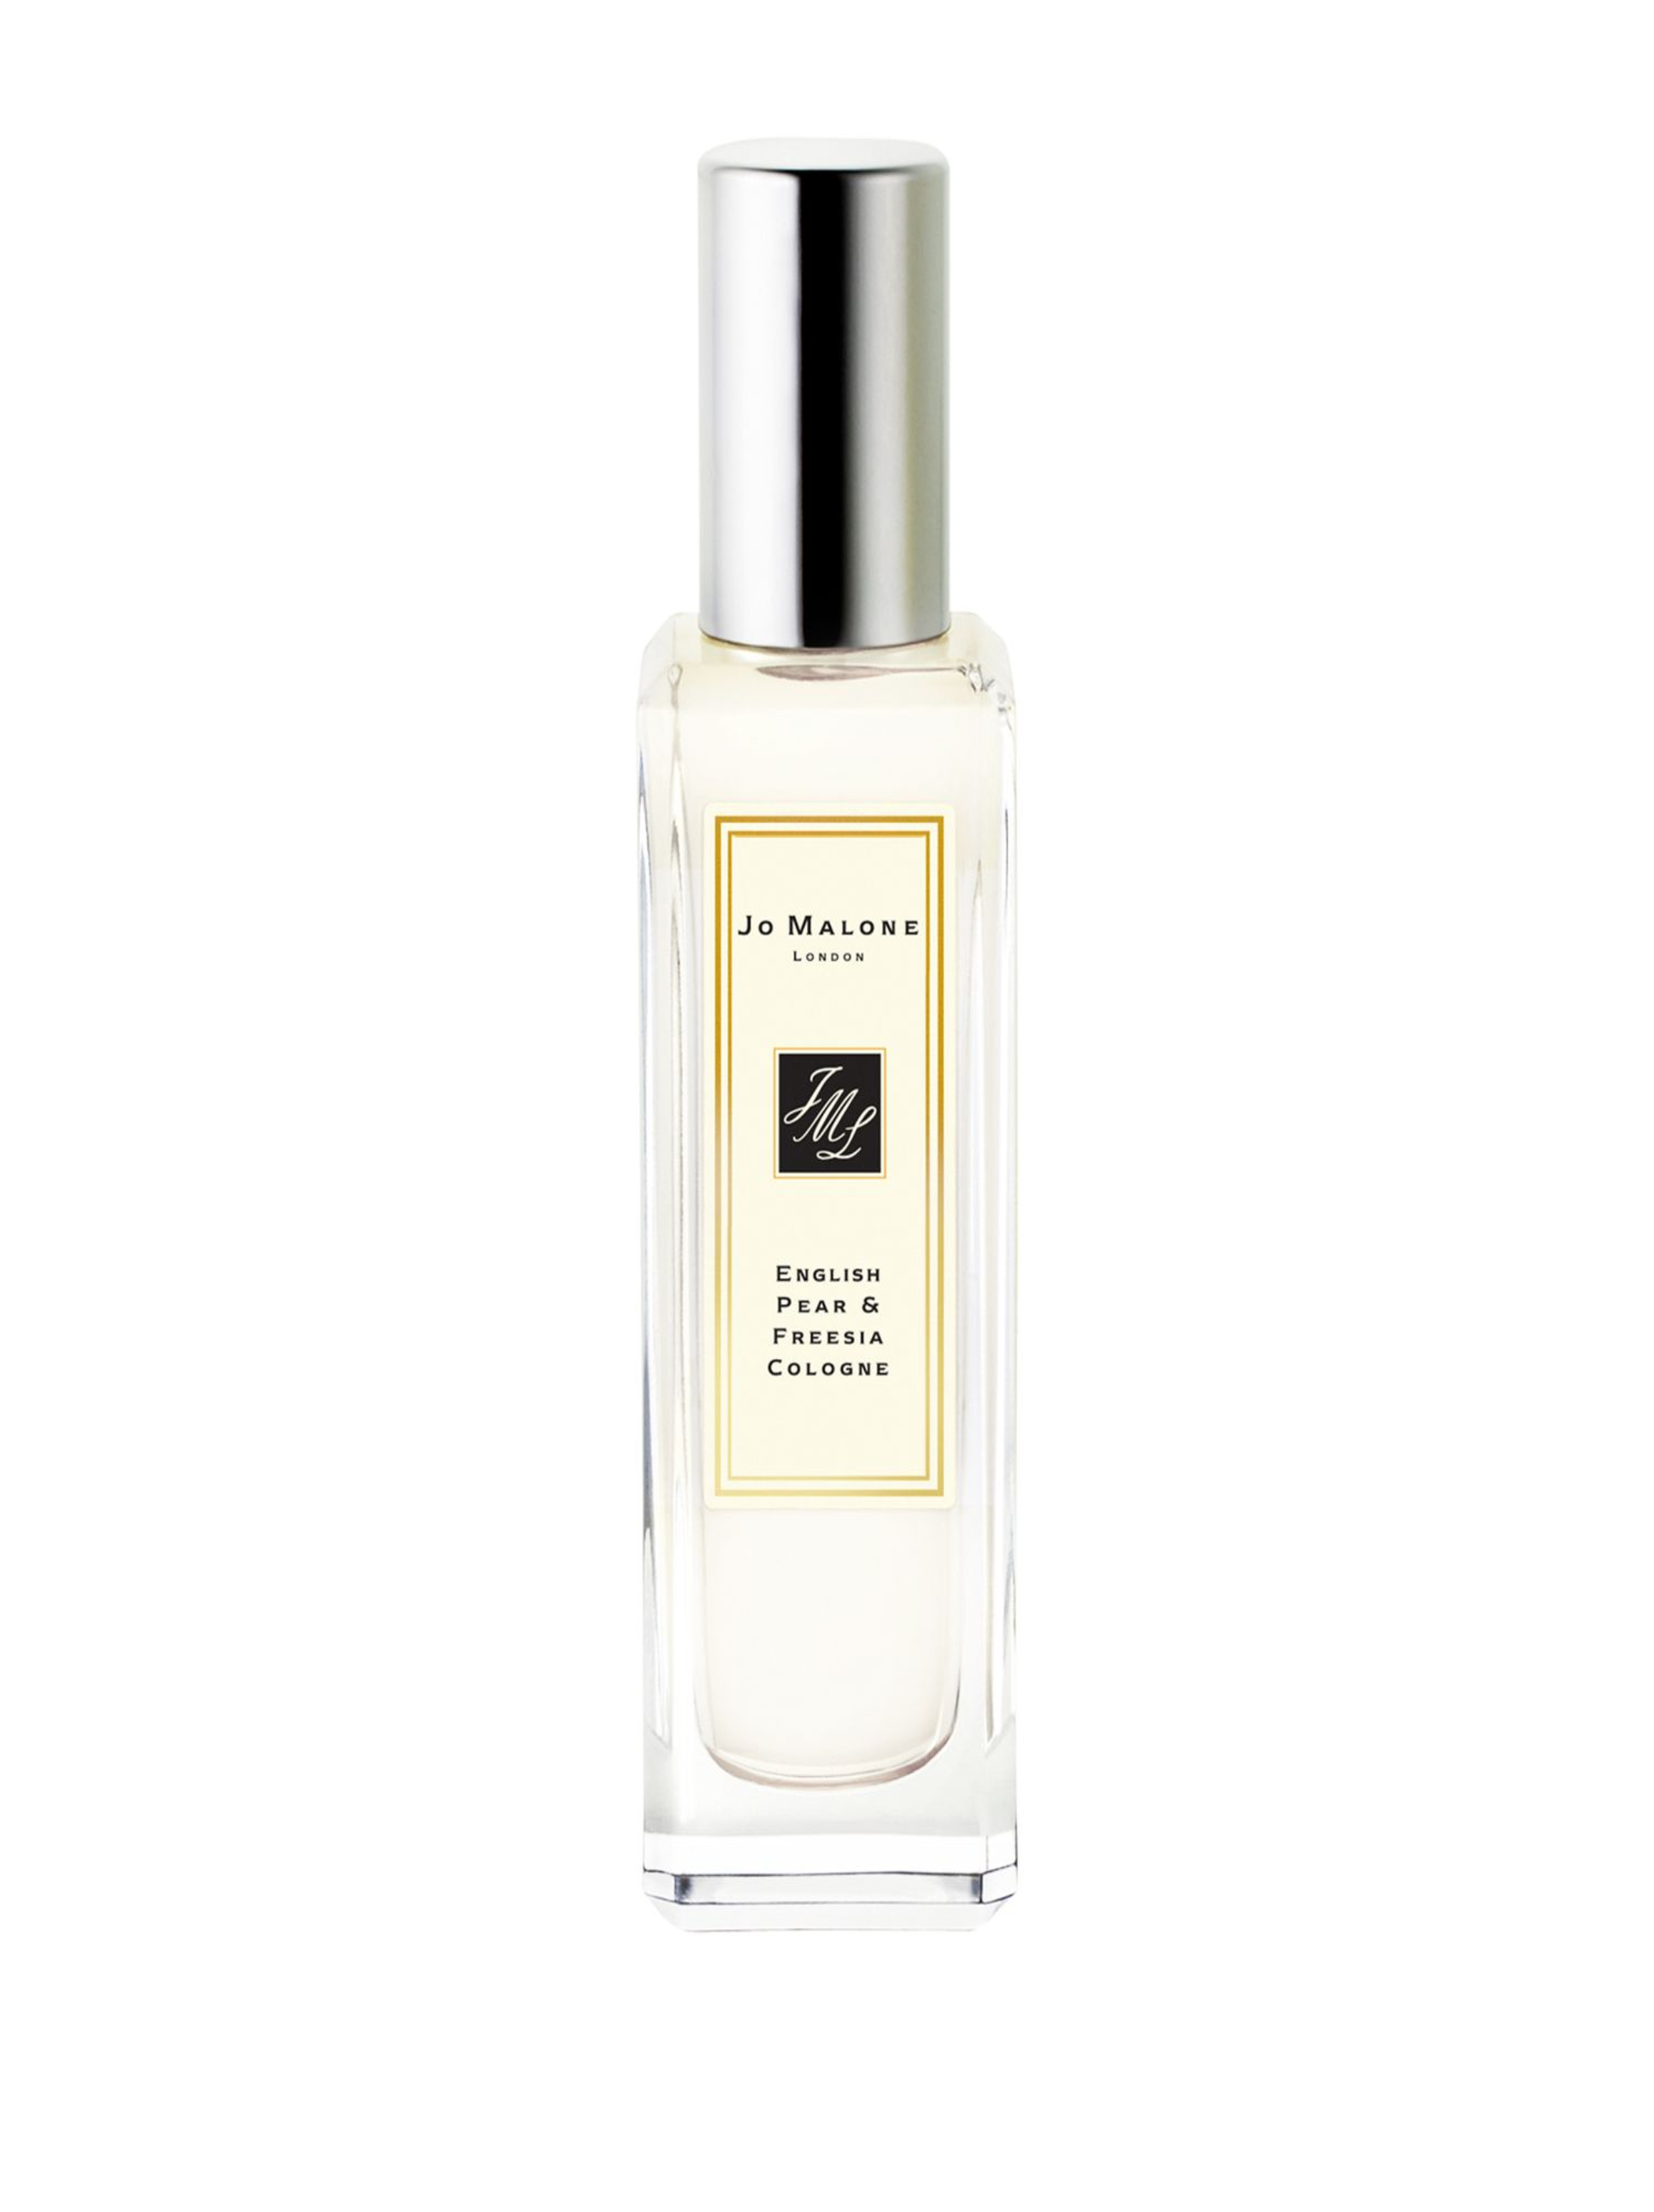 Jo Malone London English Pear  Freesia Cologne, 30 ml buy for 39500 KZT  in the official Viled online store, art. L26K010000